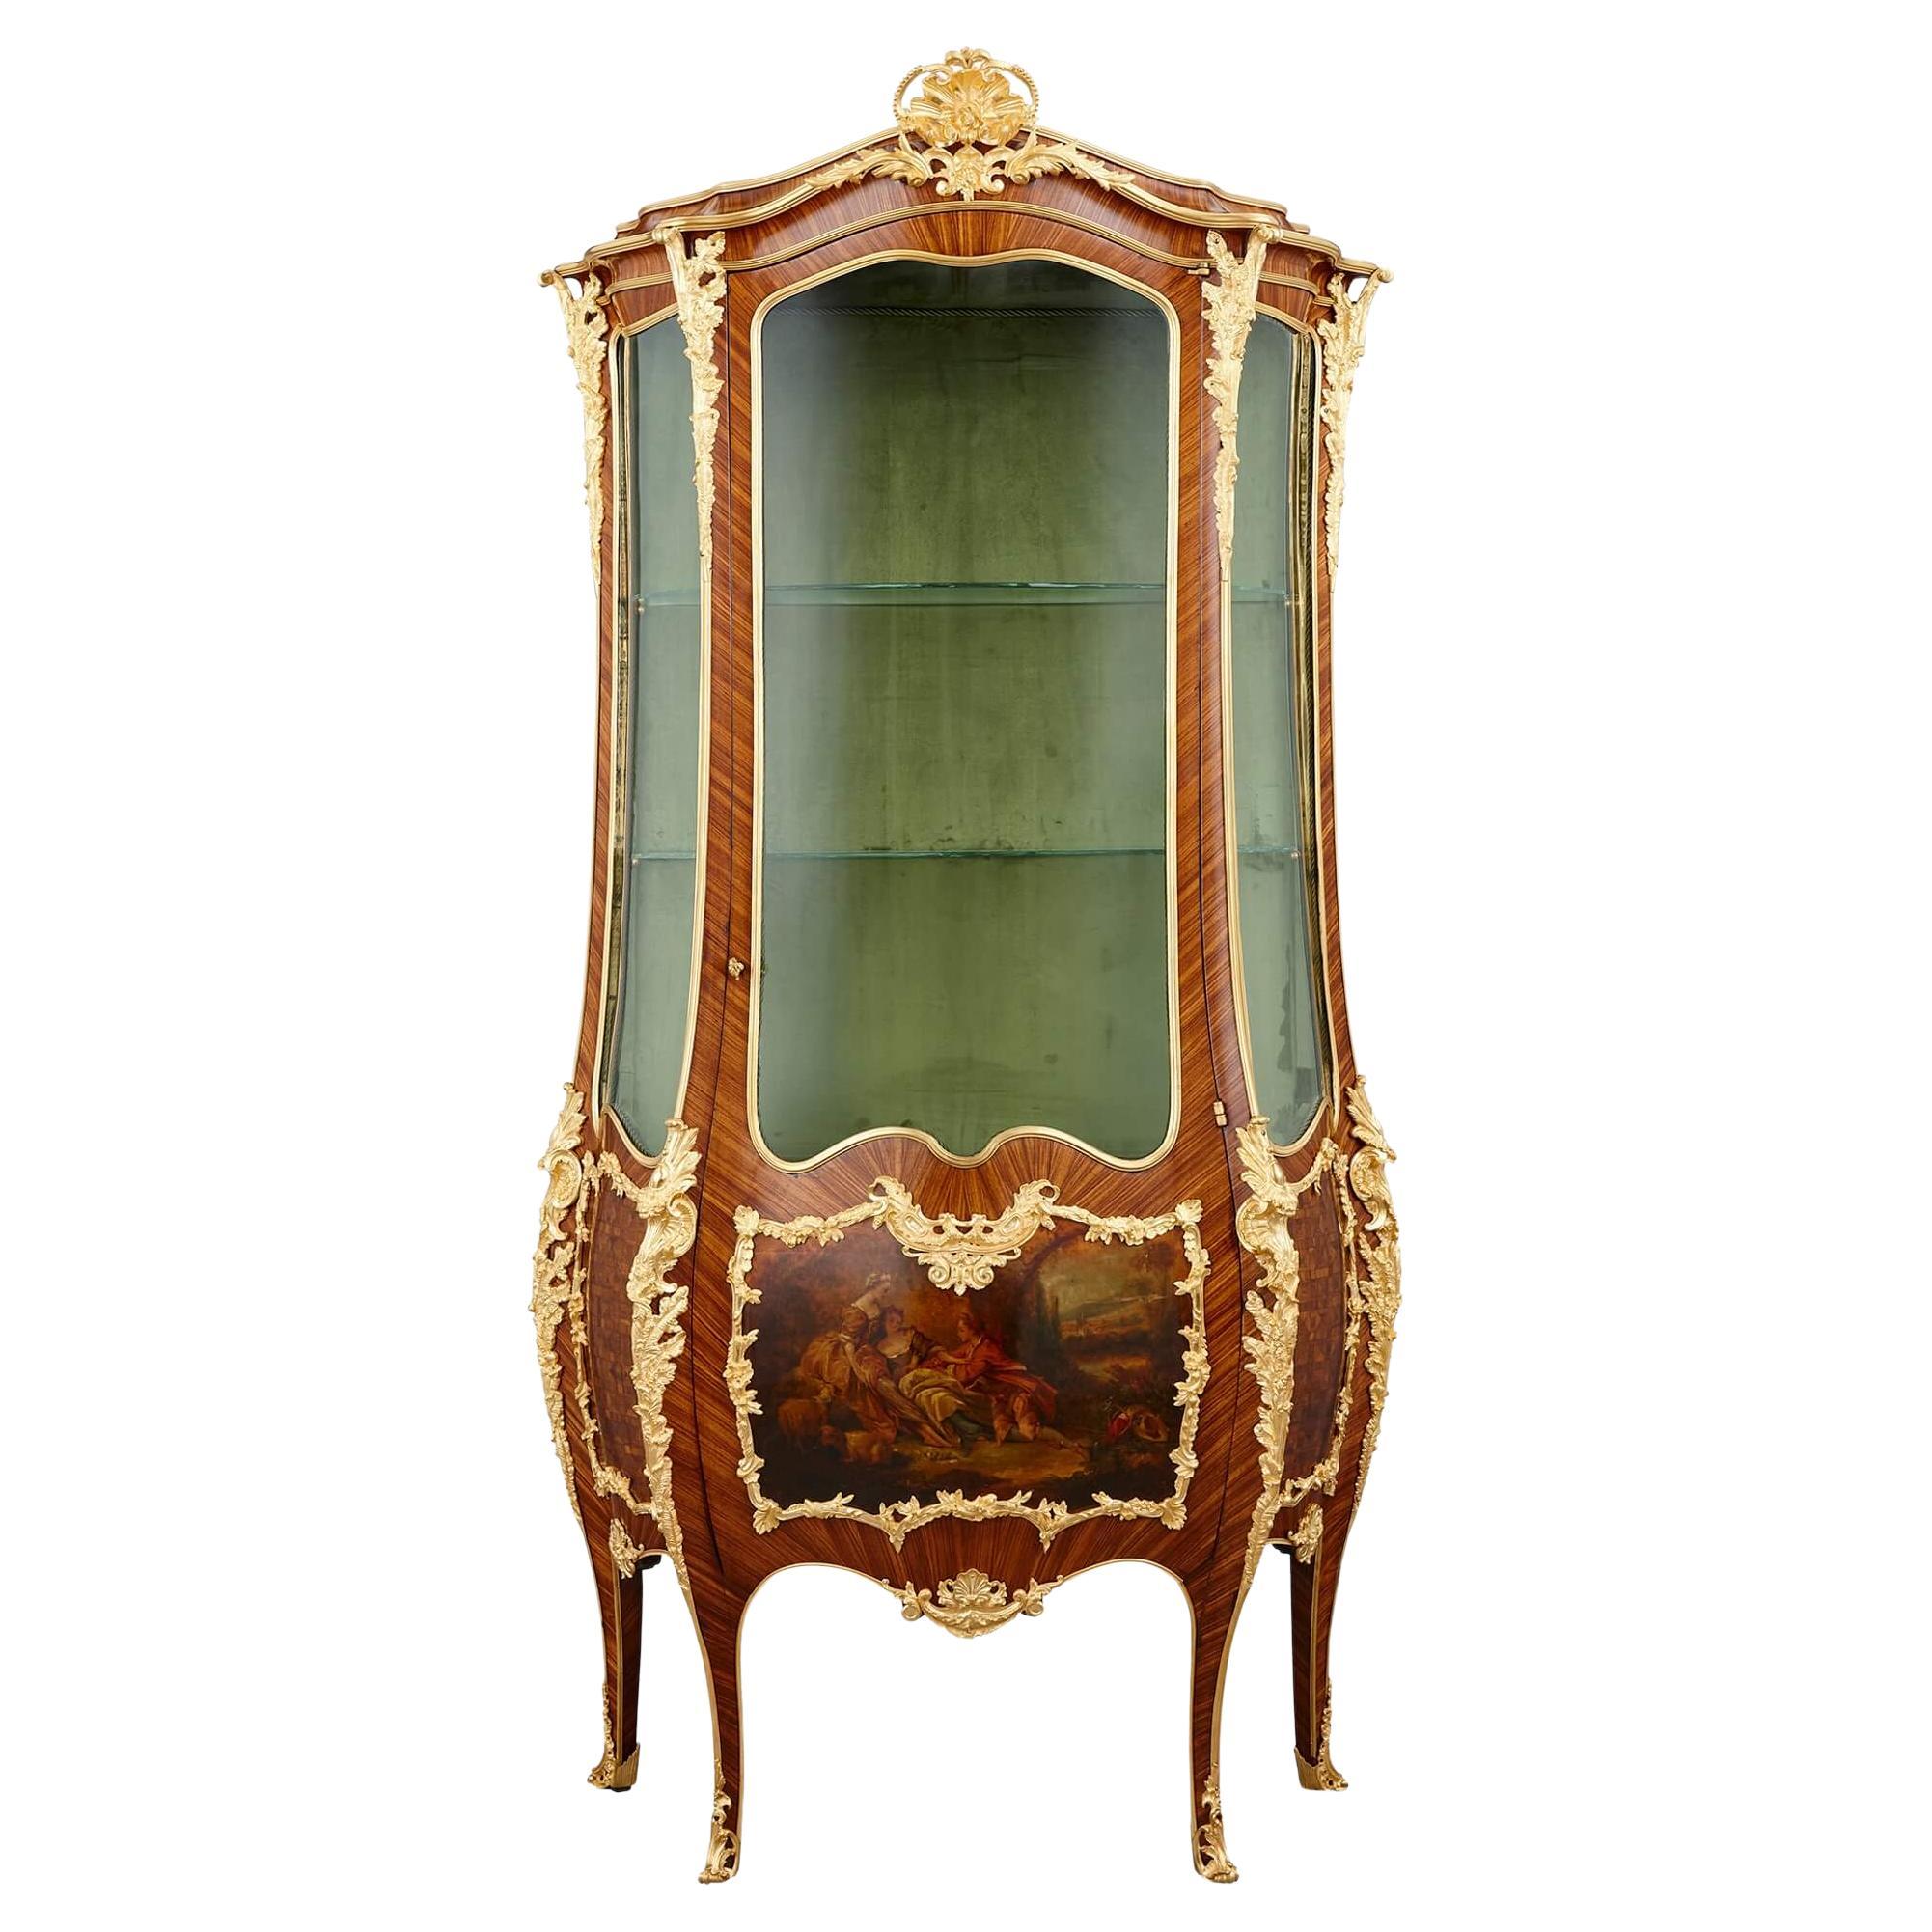 Louis XV Style Gilt-Bronze Mounted Vernis Martin and Parquetry Vitrine